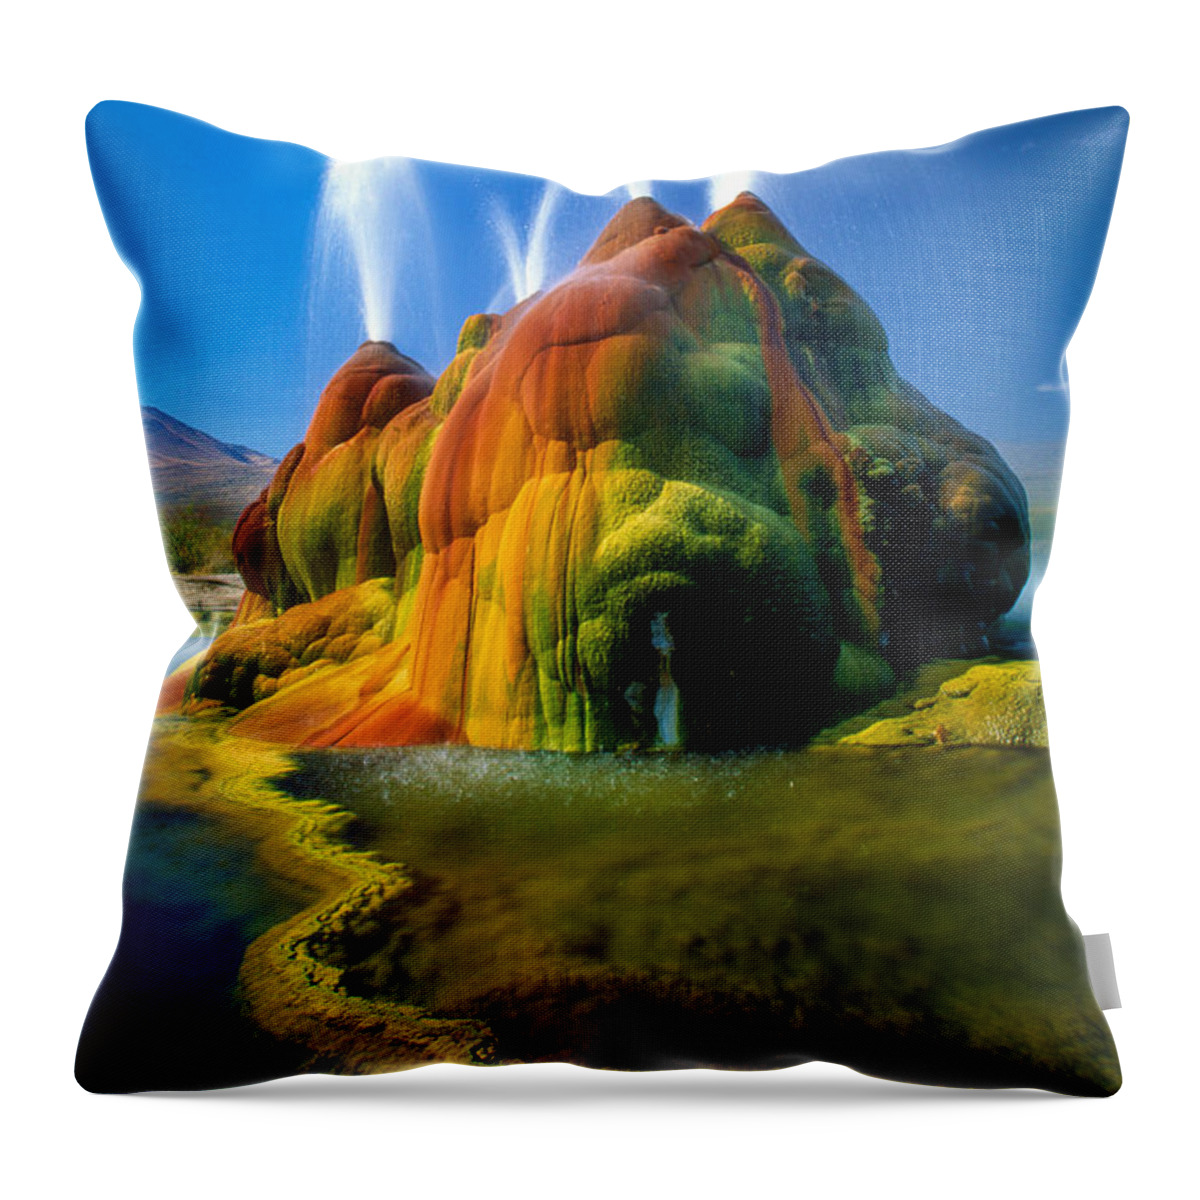 Fly Geyser Throw Pillow featuring the photograph Fly Geyser Travertine by Inge Johnsson